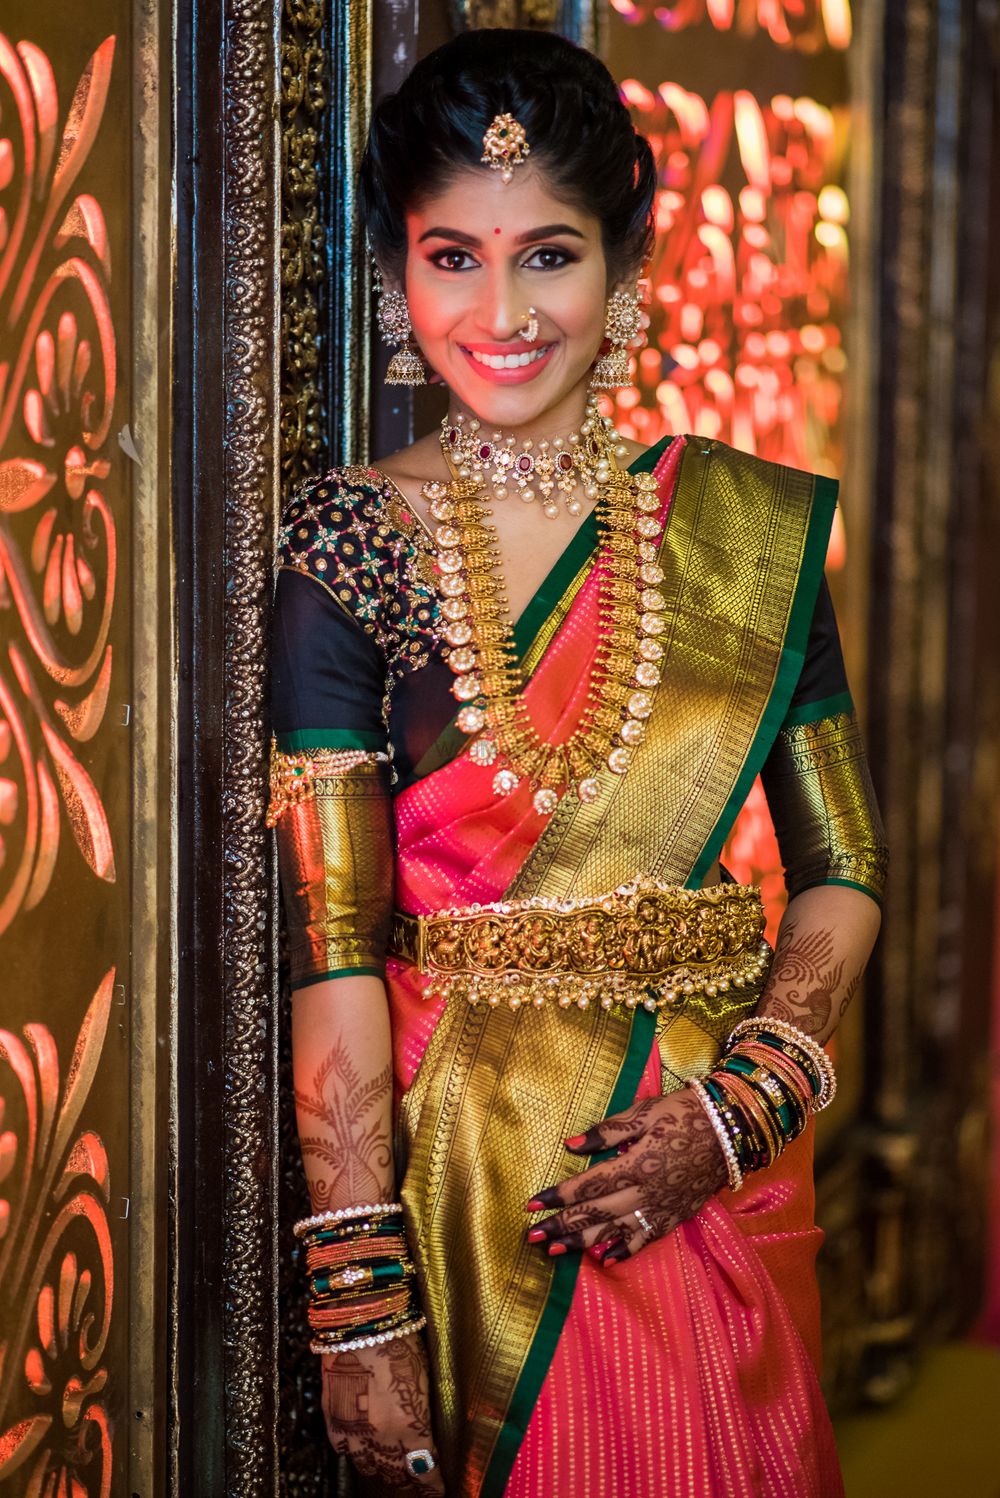 Photo of Temple jewellery waist belt South Indian bride